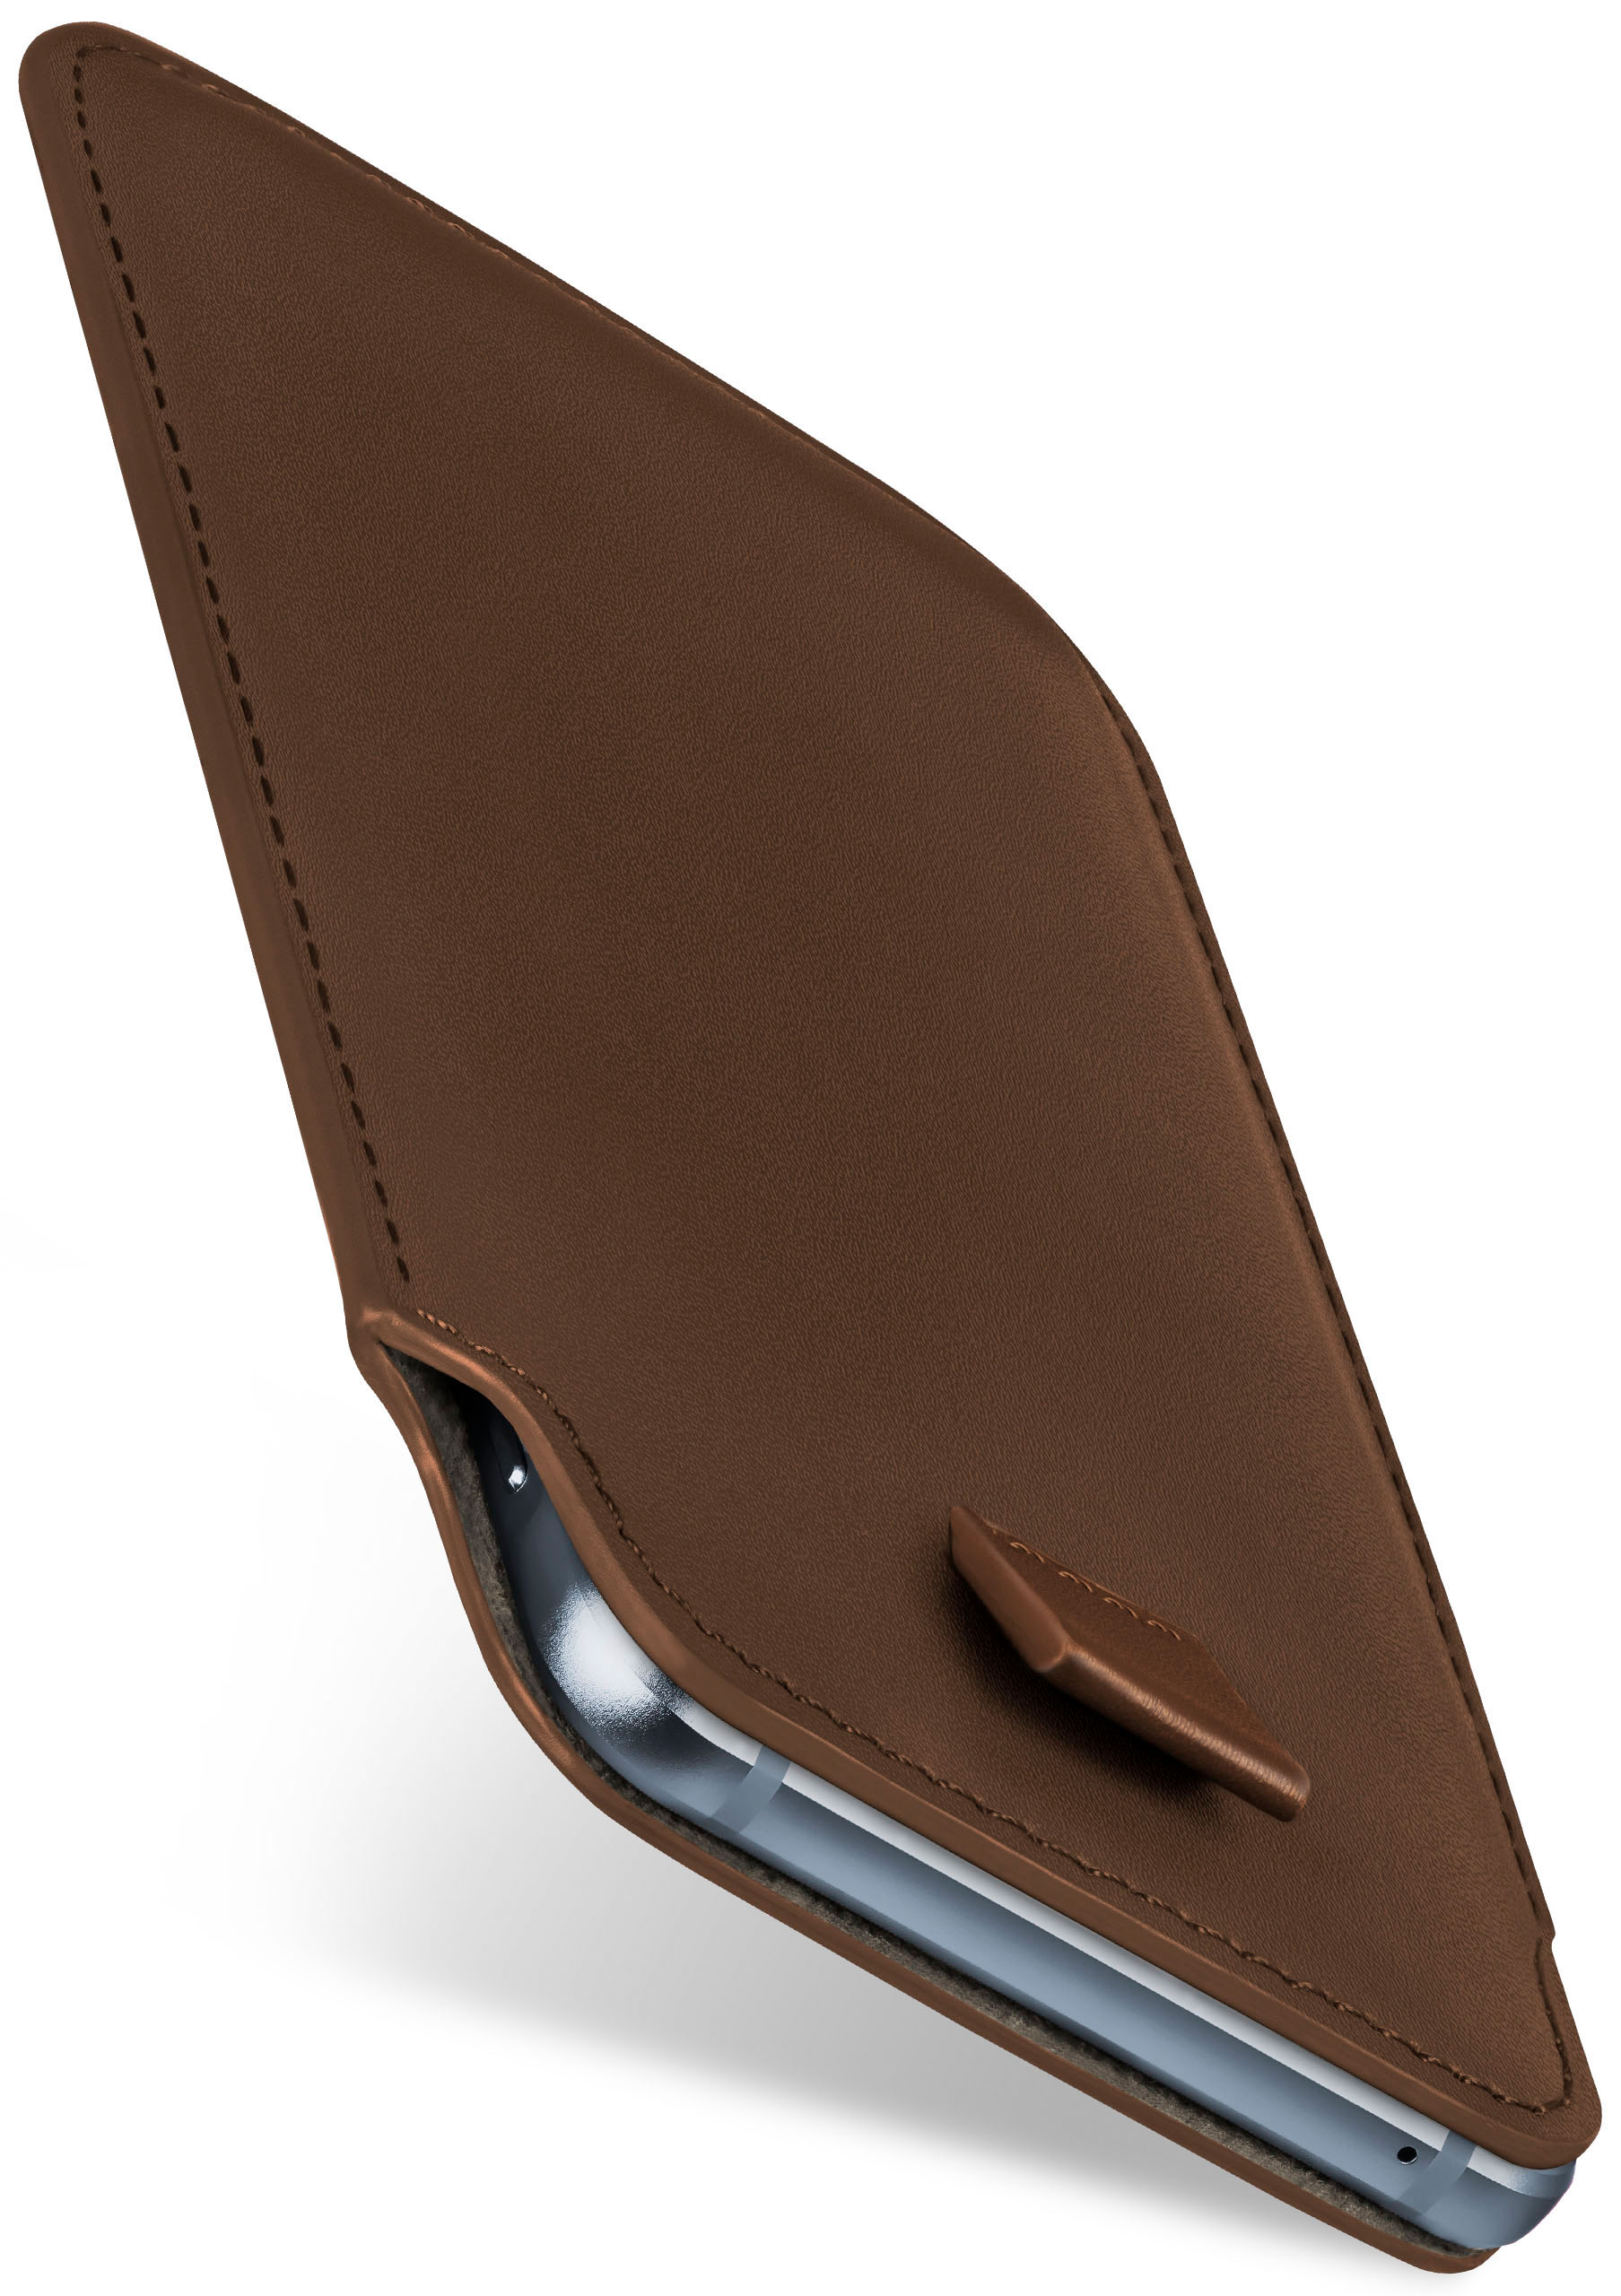 MOEX Slide Full Oxide-Brown XZ2 Cover, Compact, Sony, Case, Xperia